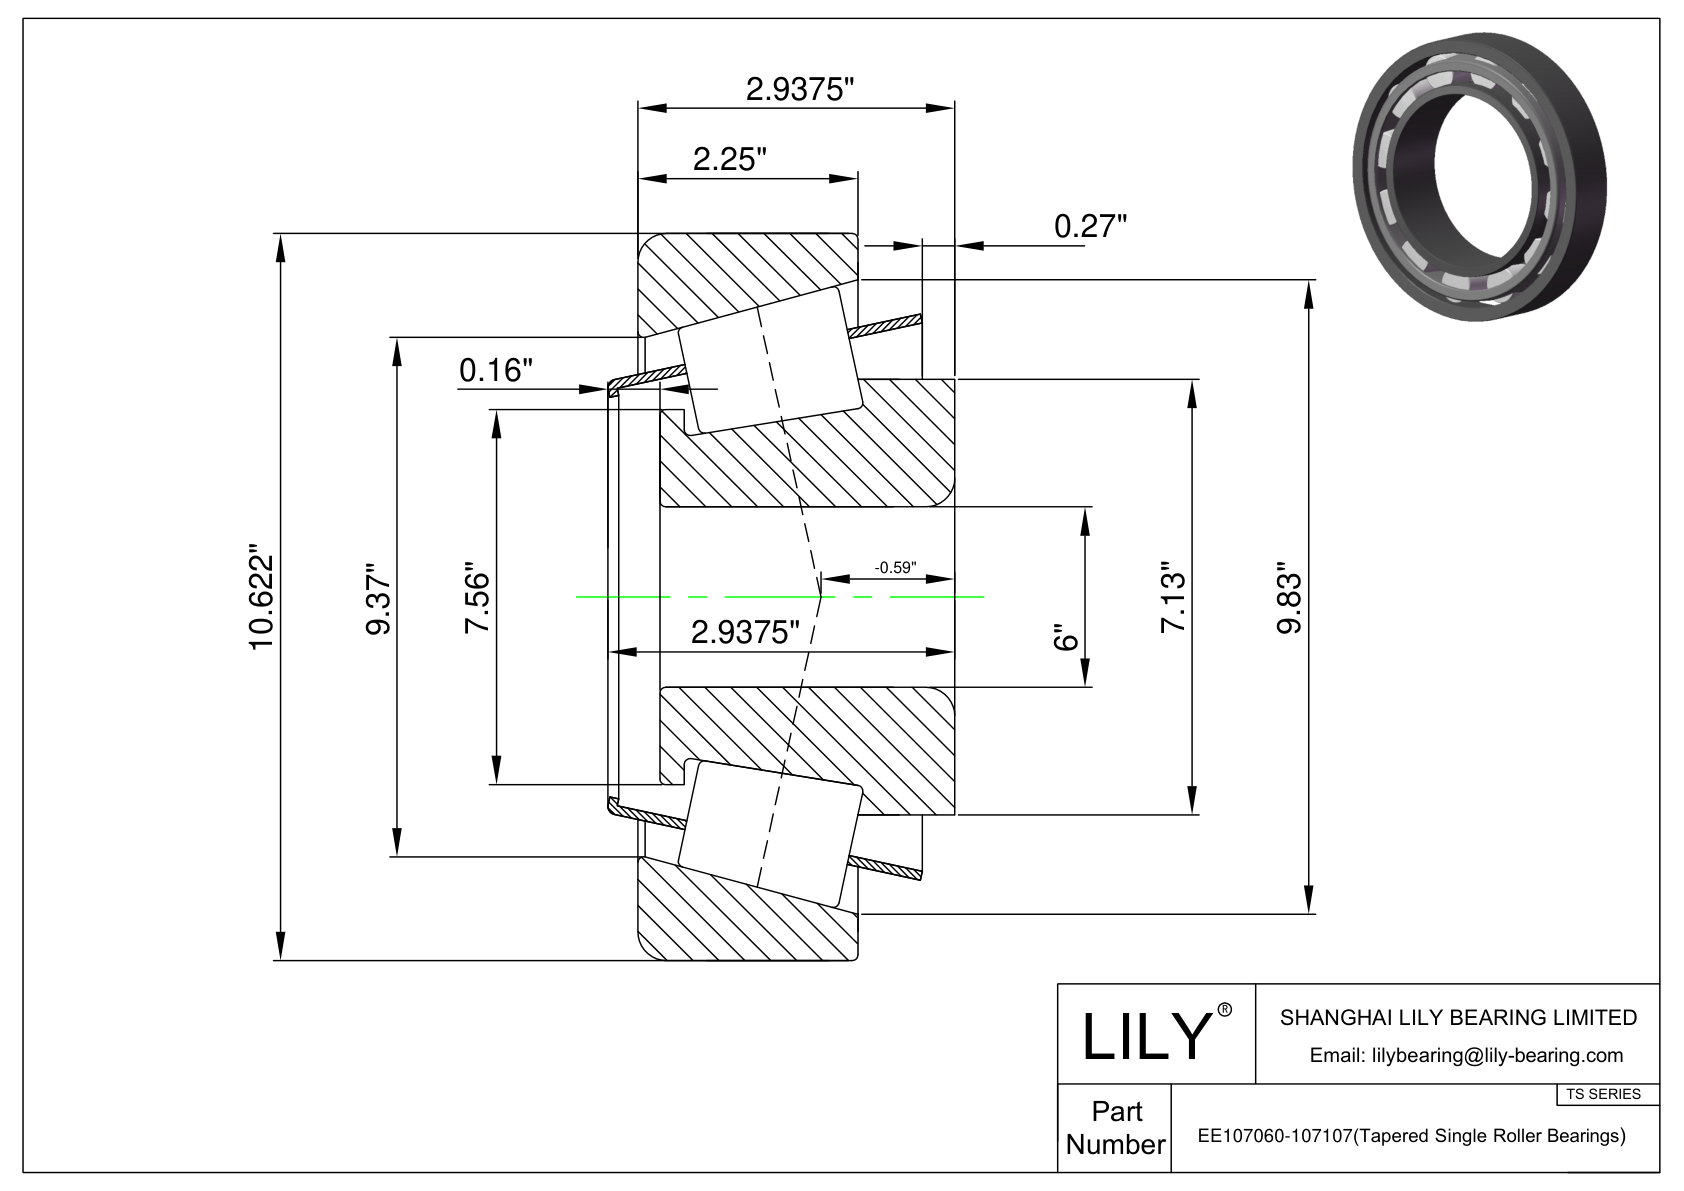 EE107060-107107 TS (Tapered Single Roller Bearings) (Imperial) cad drawing